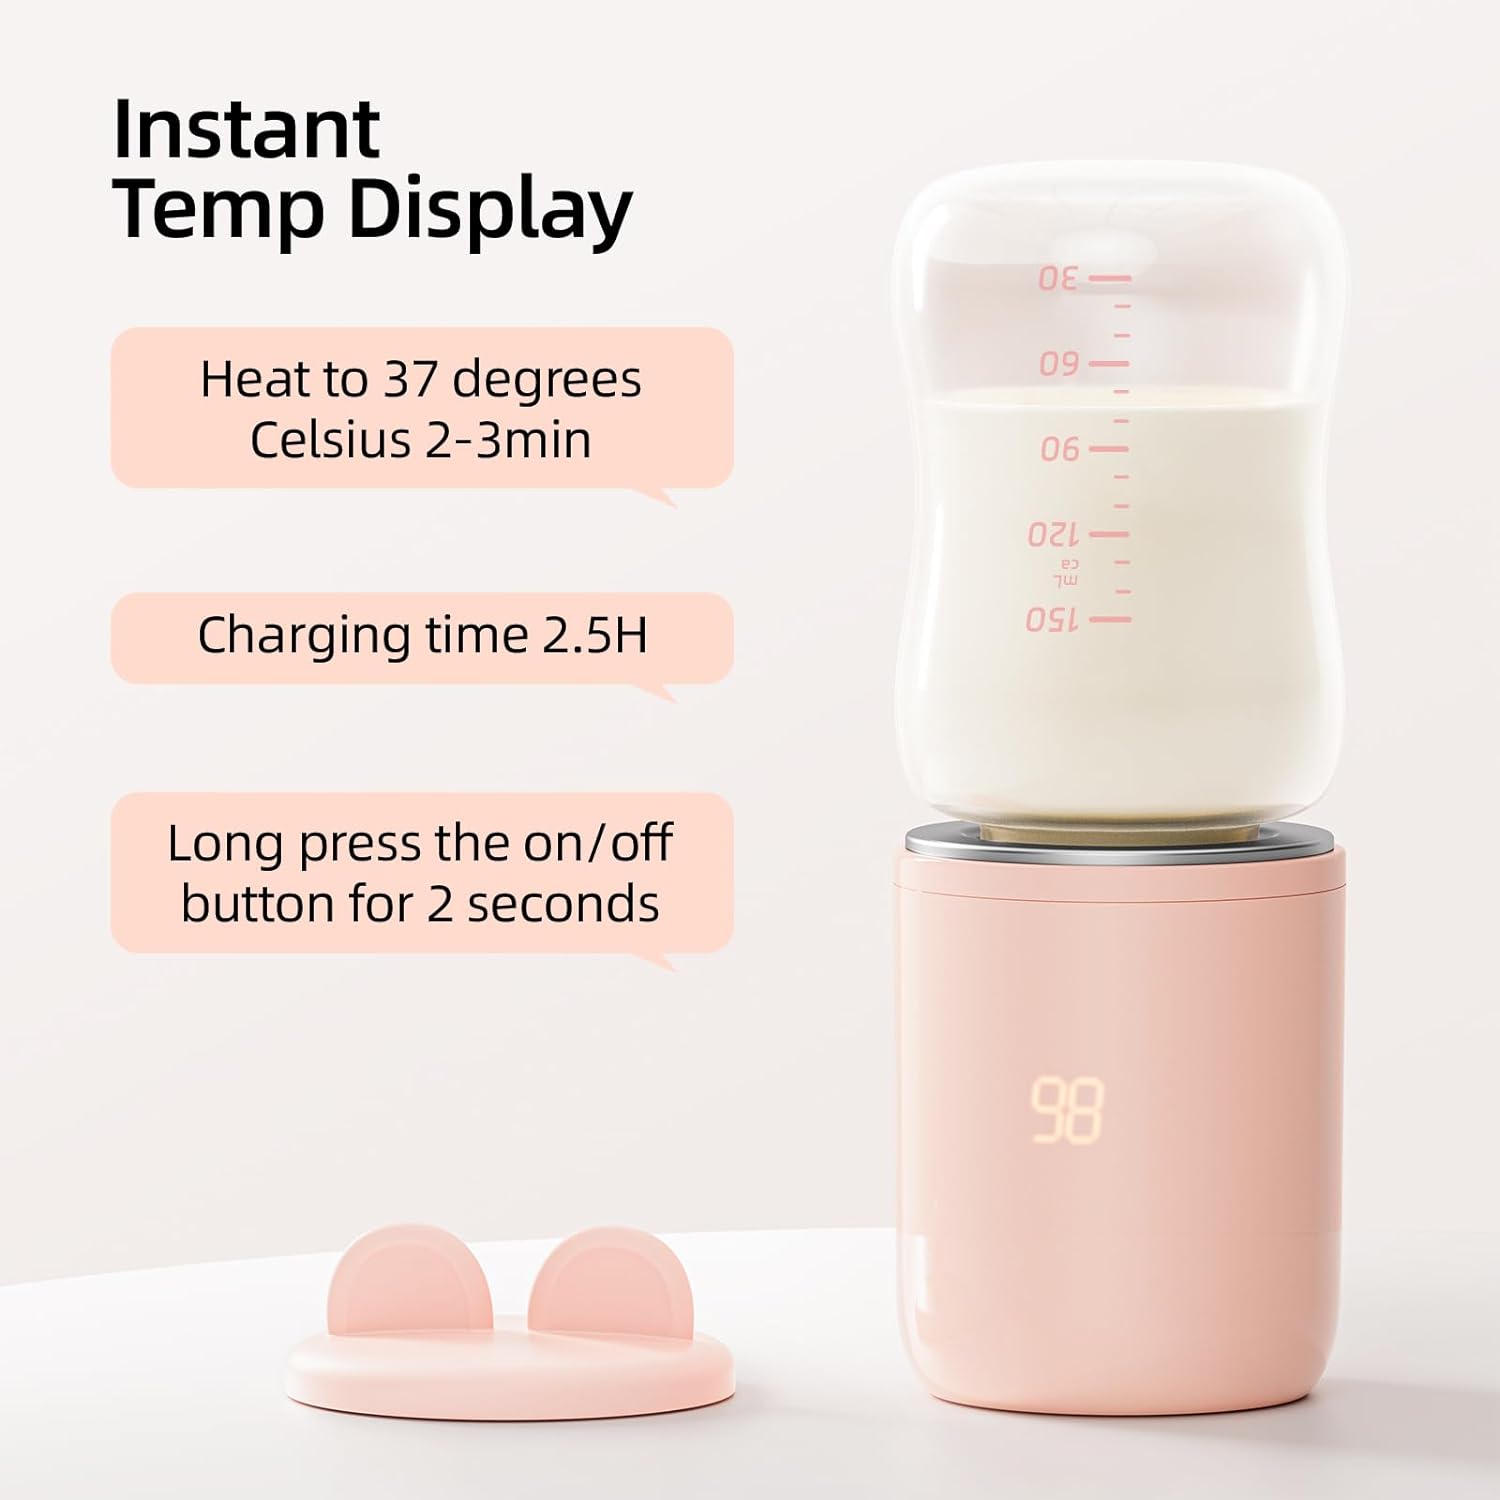 Iuzuo Portable Baby Bottle Warmer, Fast Baby Bottle Warmer for Travel with 5 Adapters, Rechargeable Bottle Warmer On The Go with Precise Temperature Control for Breast Milk, Formula